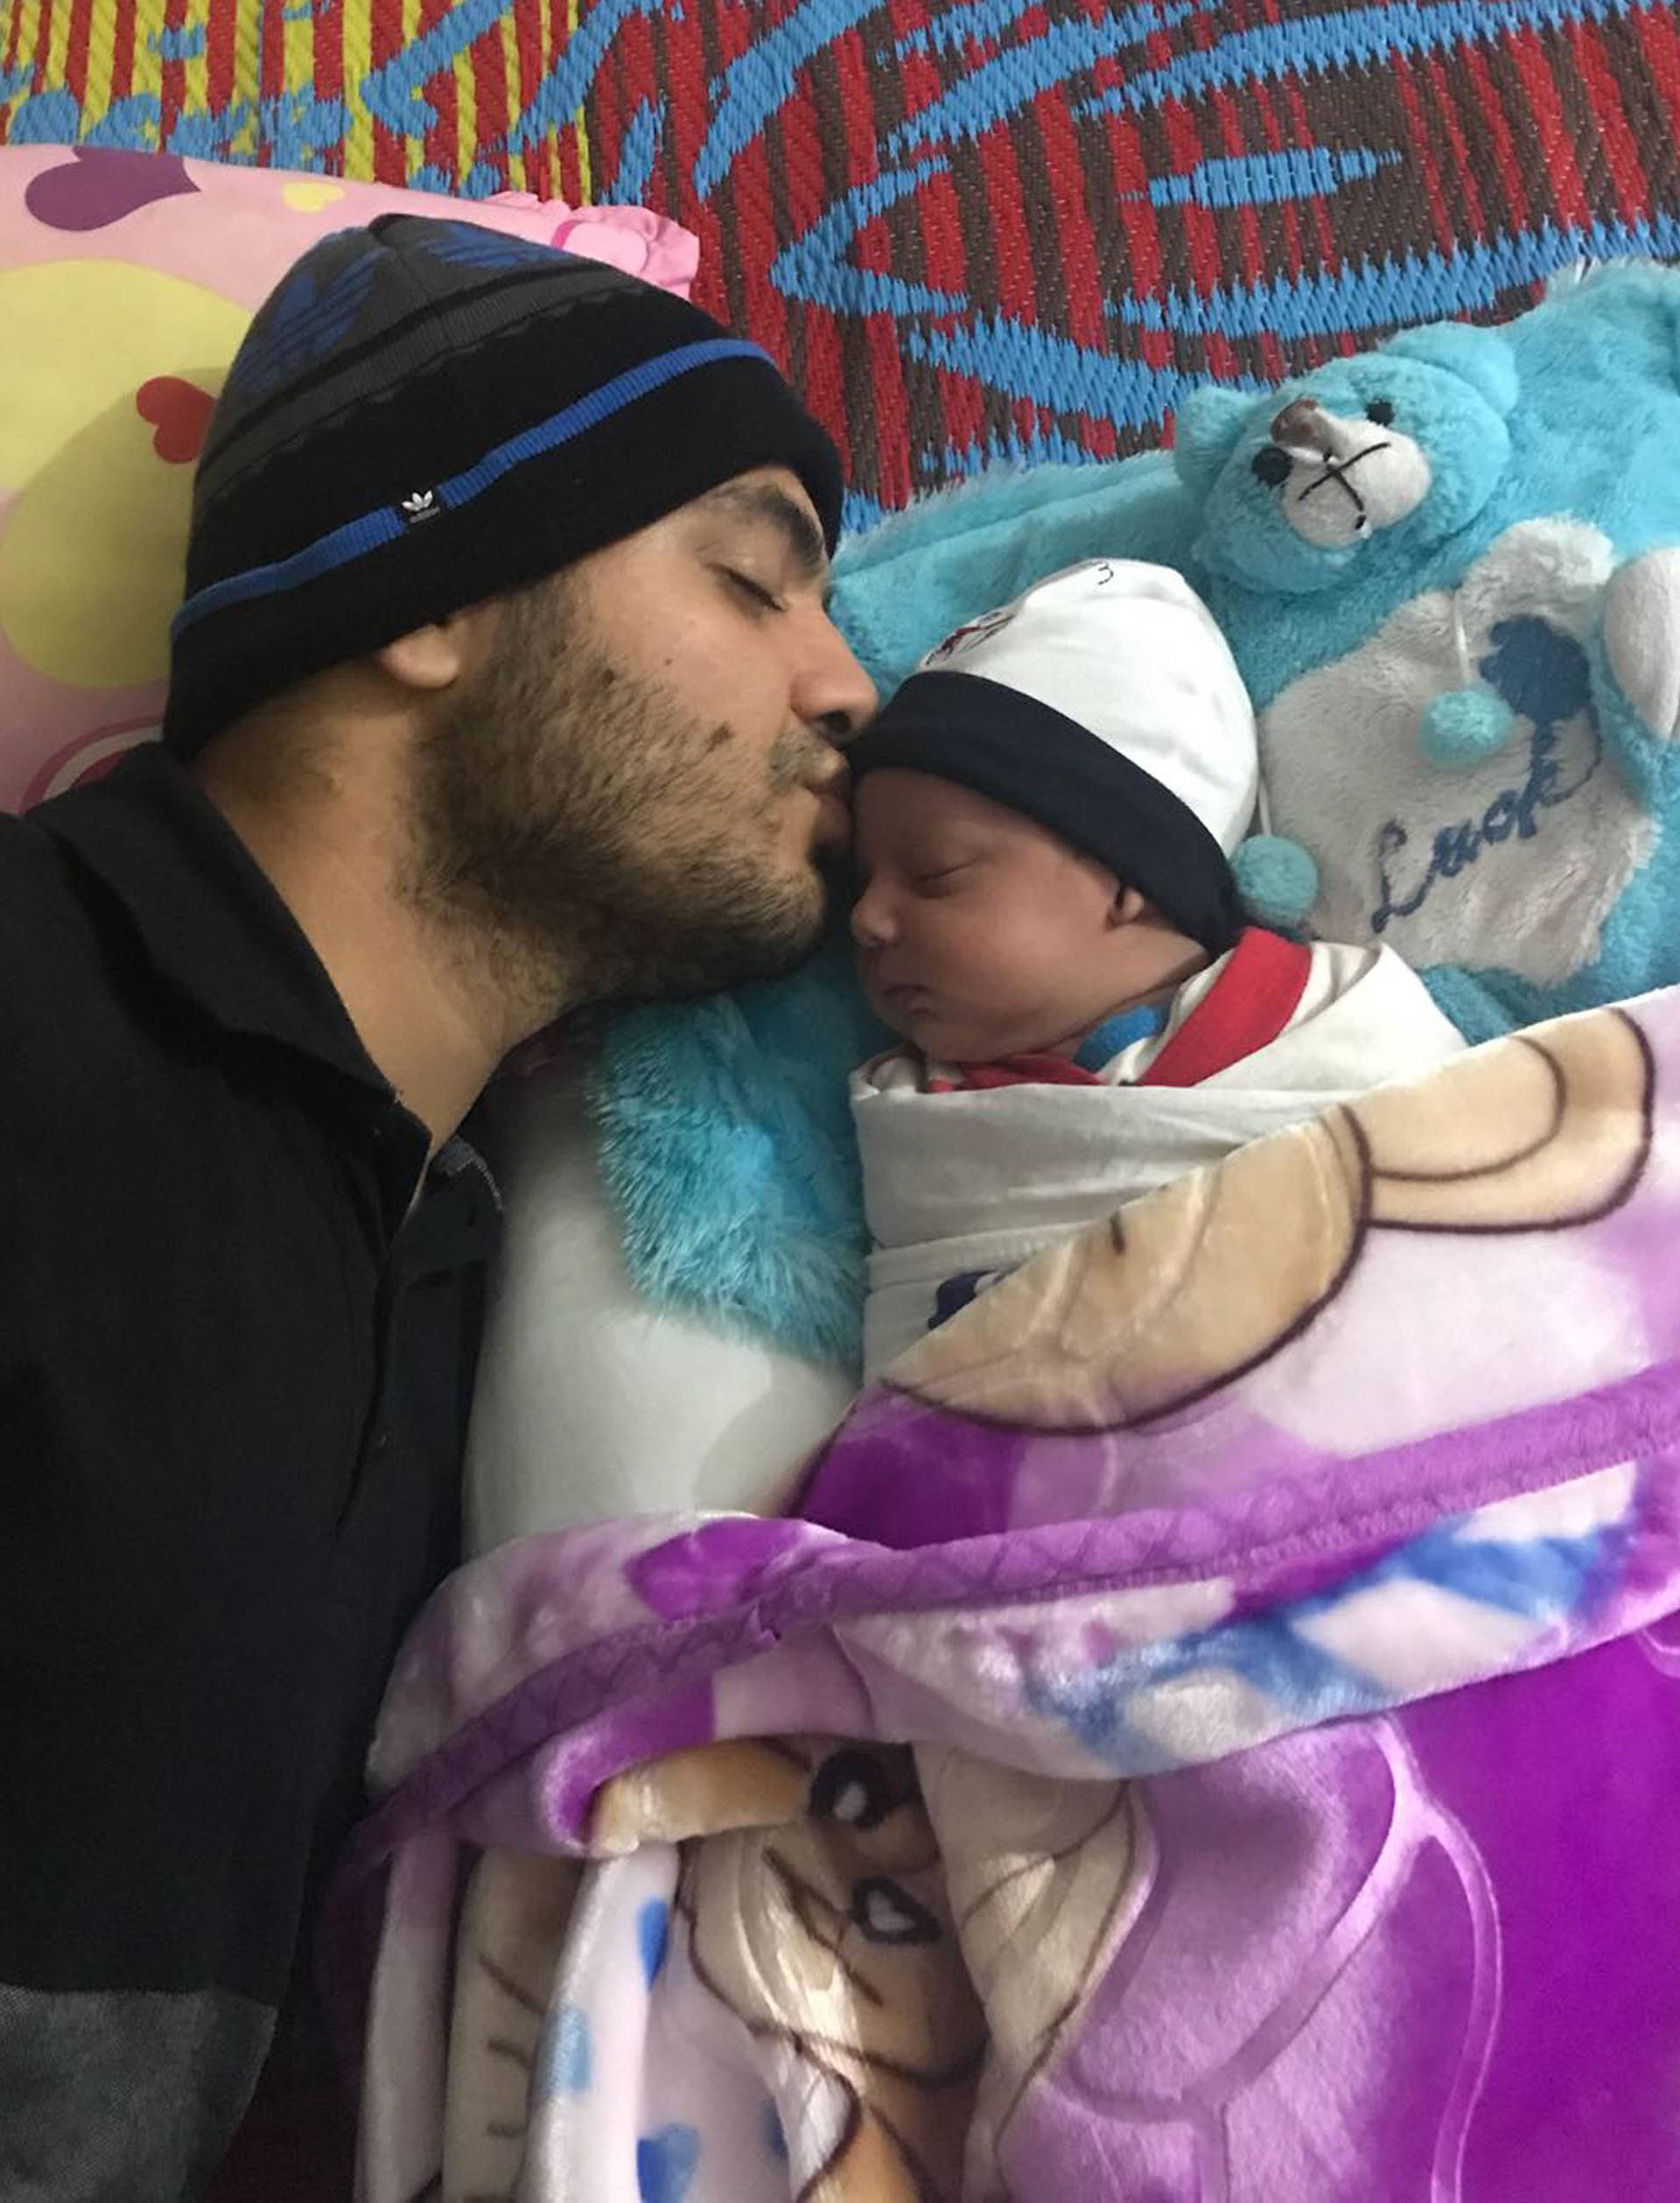 EXCLUSIVE: Joy for the man whose boyhood plight symbolised the suffering of the Iraq War after losing both arms in a bomb blast as he becomes a father.